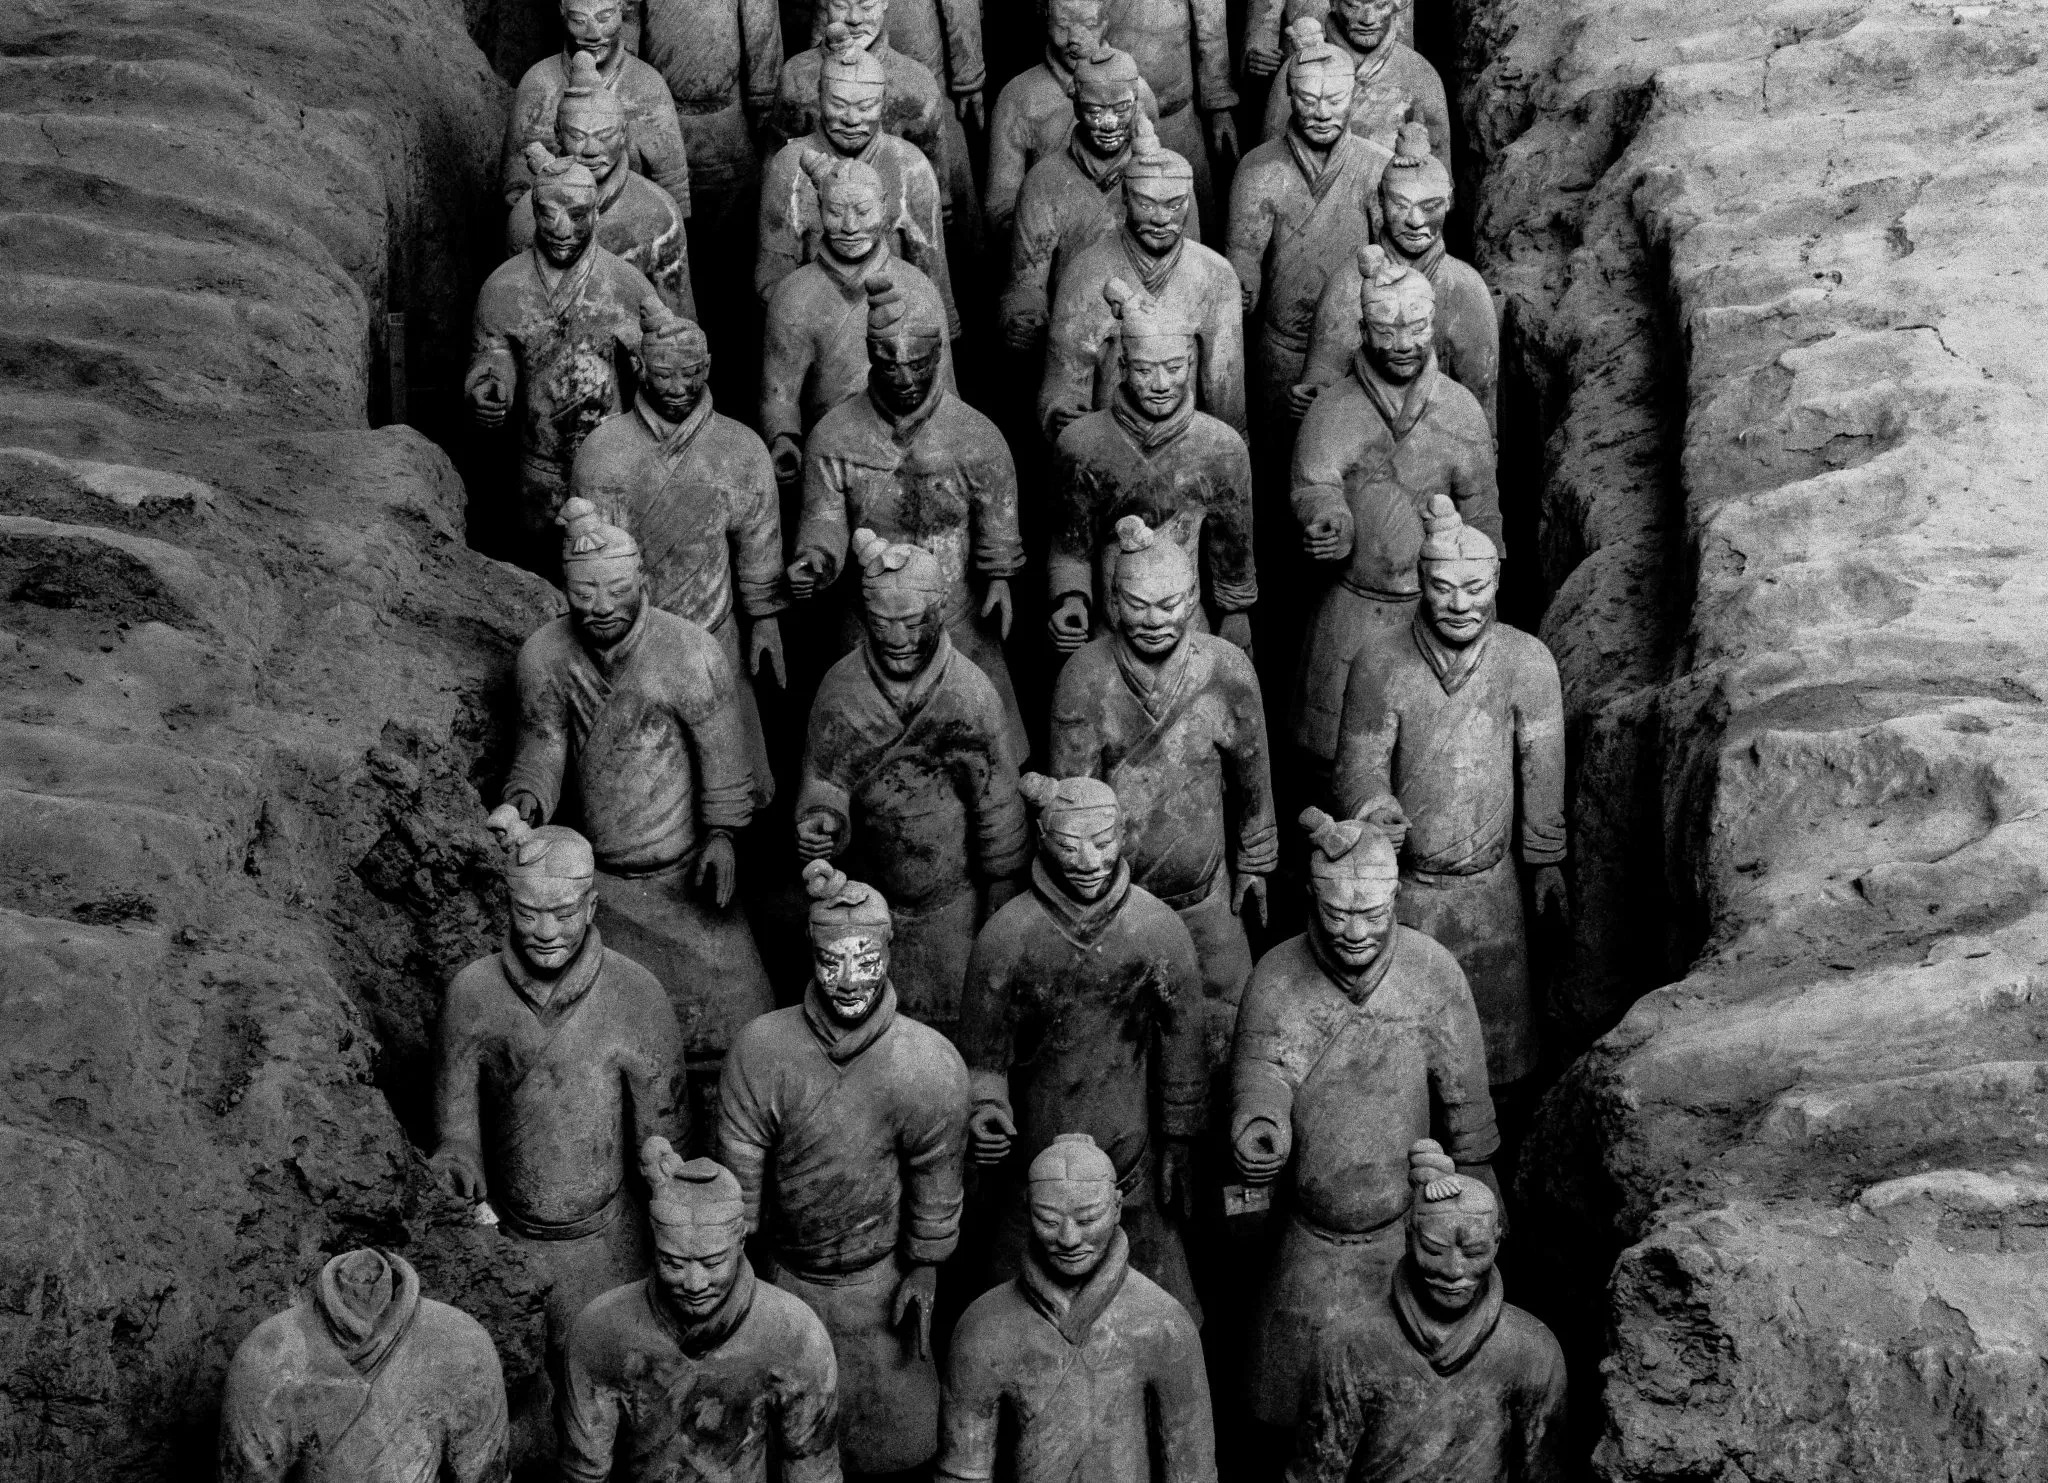 March of the terracotta warriors